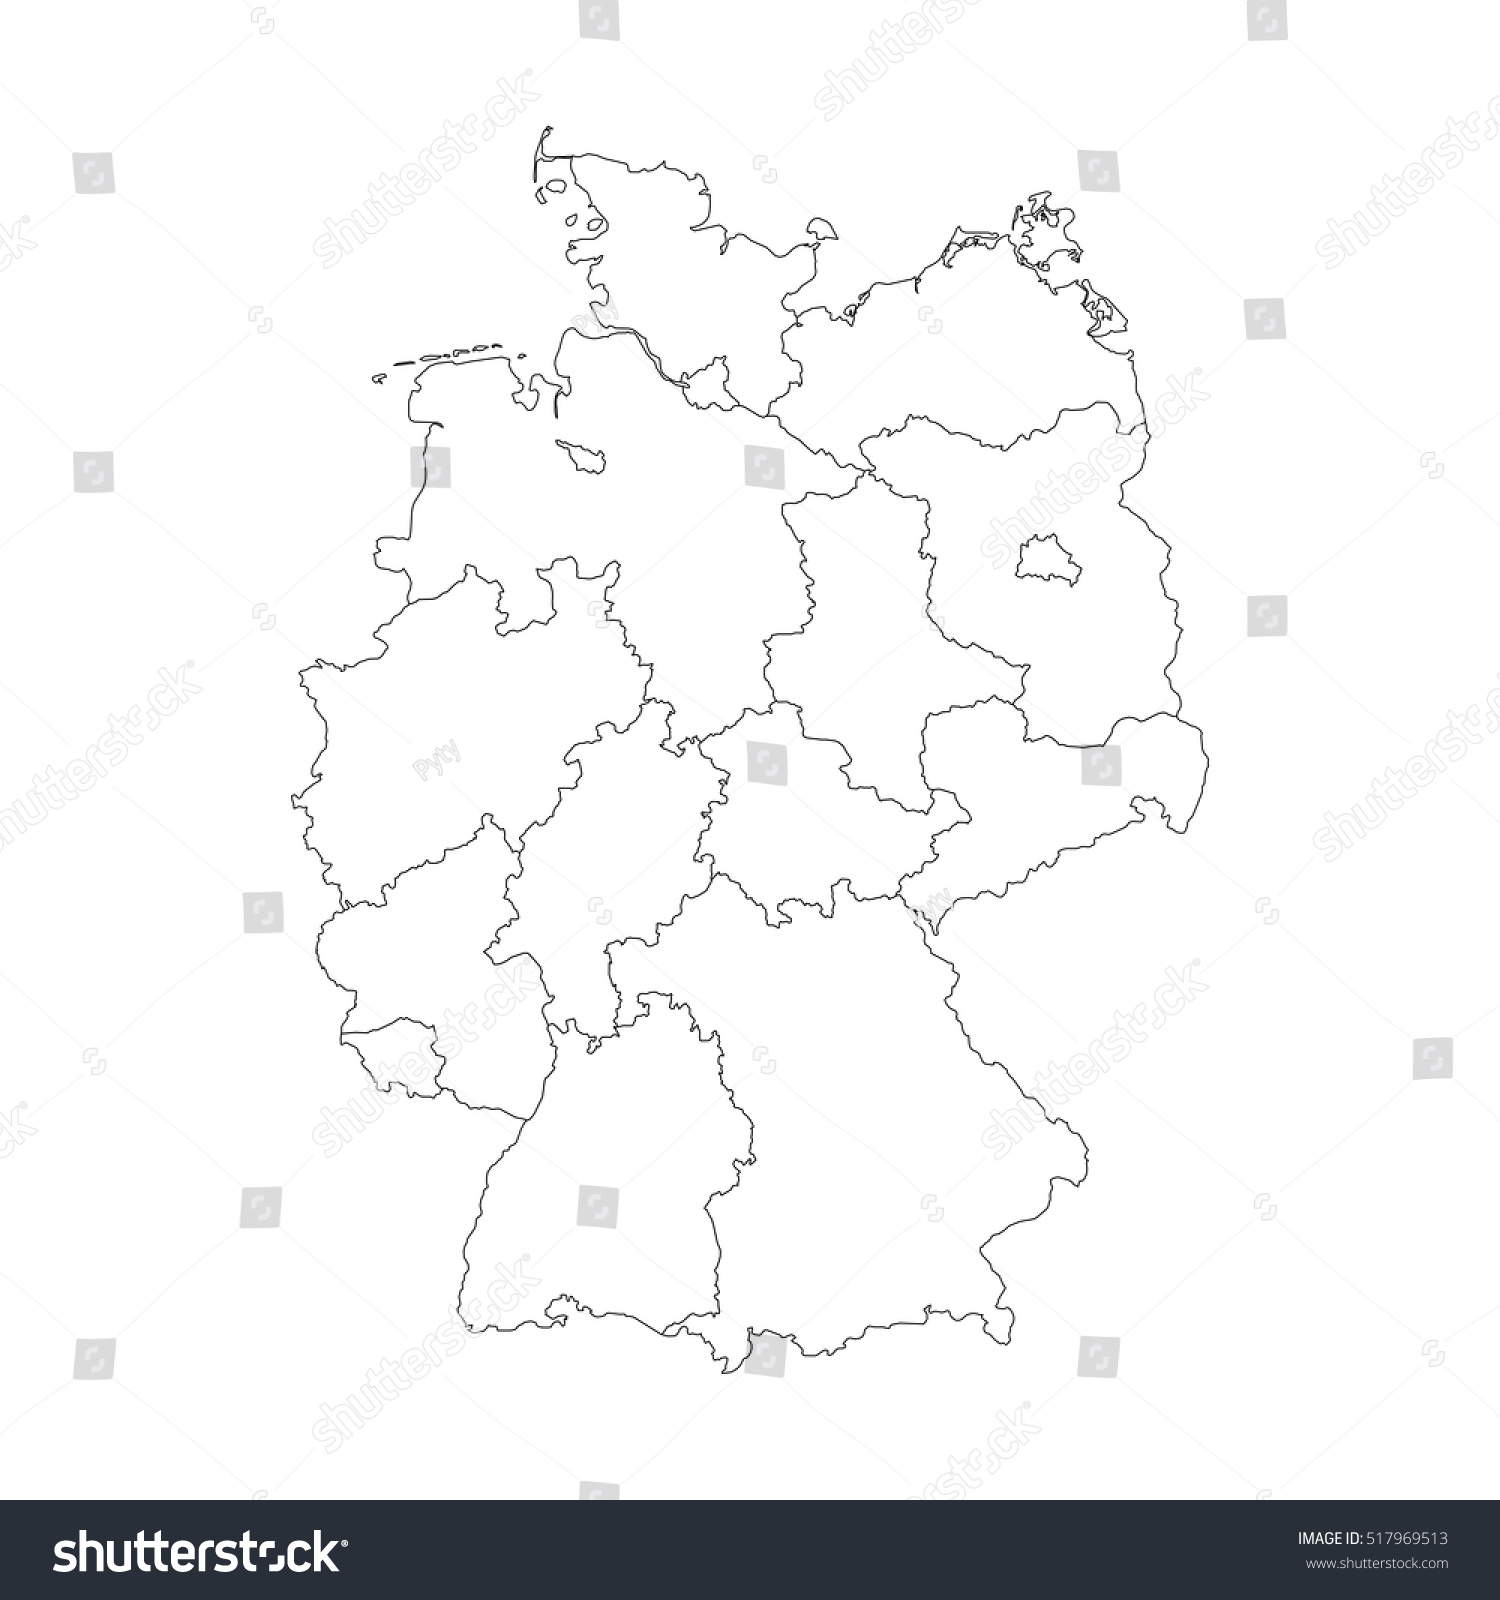 Stock Vector Map Of Germany Devided To Federal States And City States Berlin Bremen And Hamburg Europe 517969513 